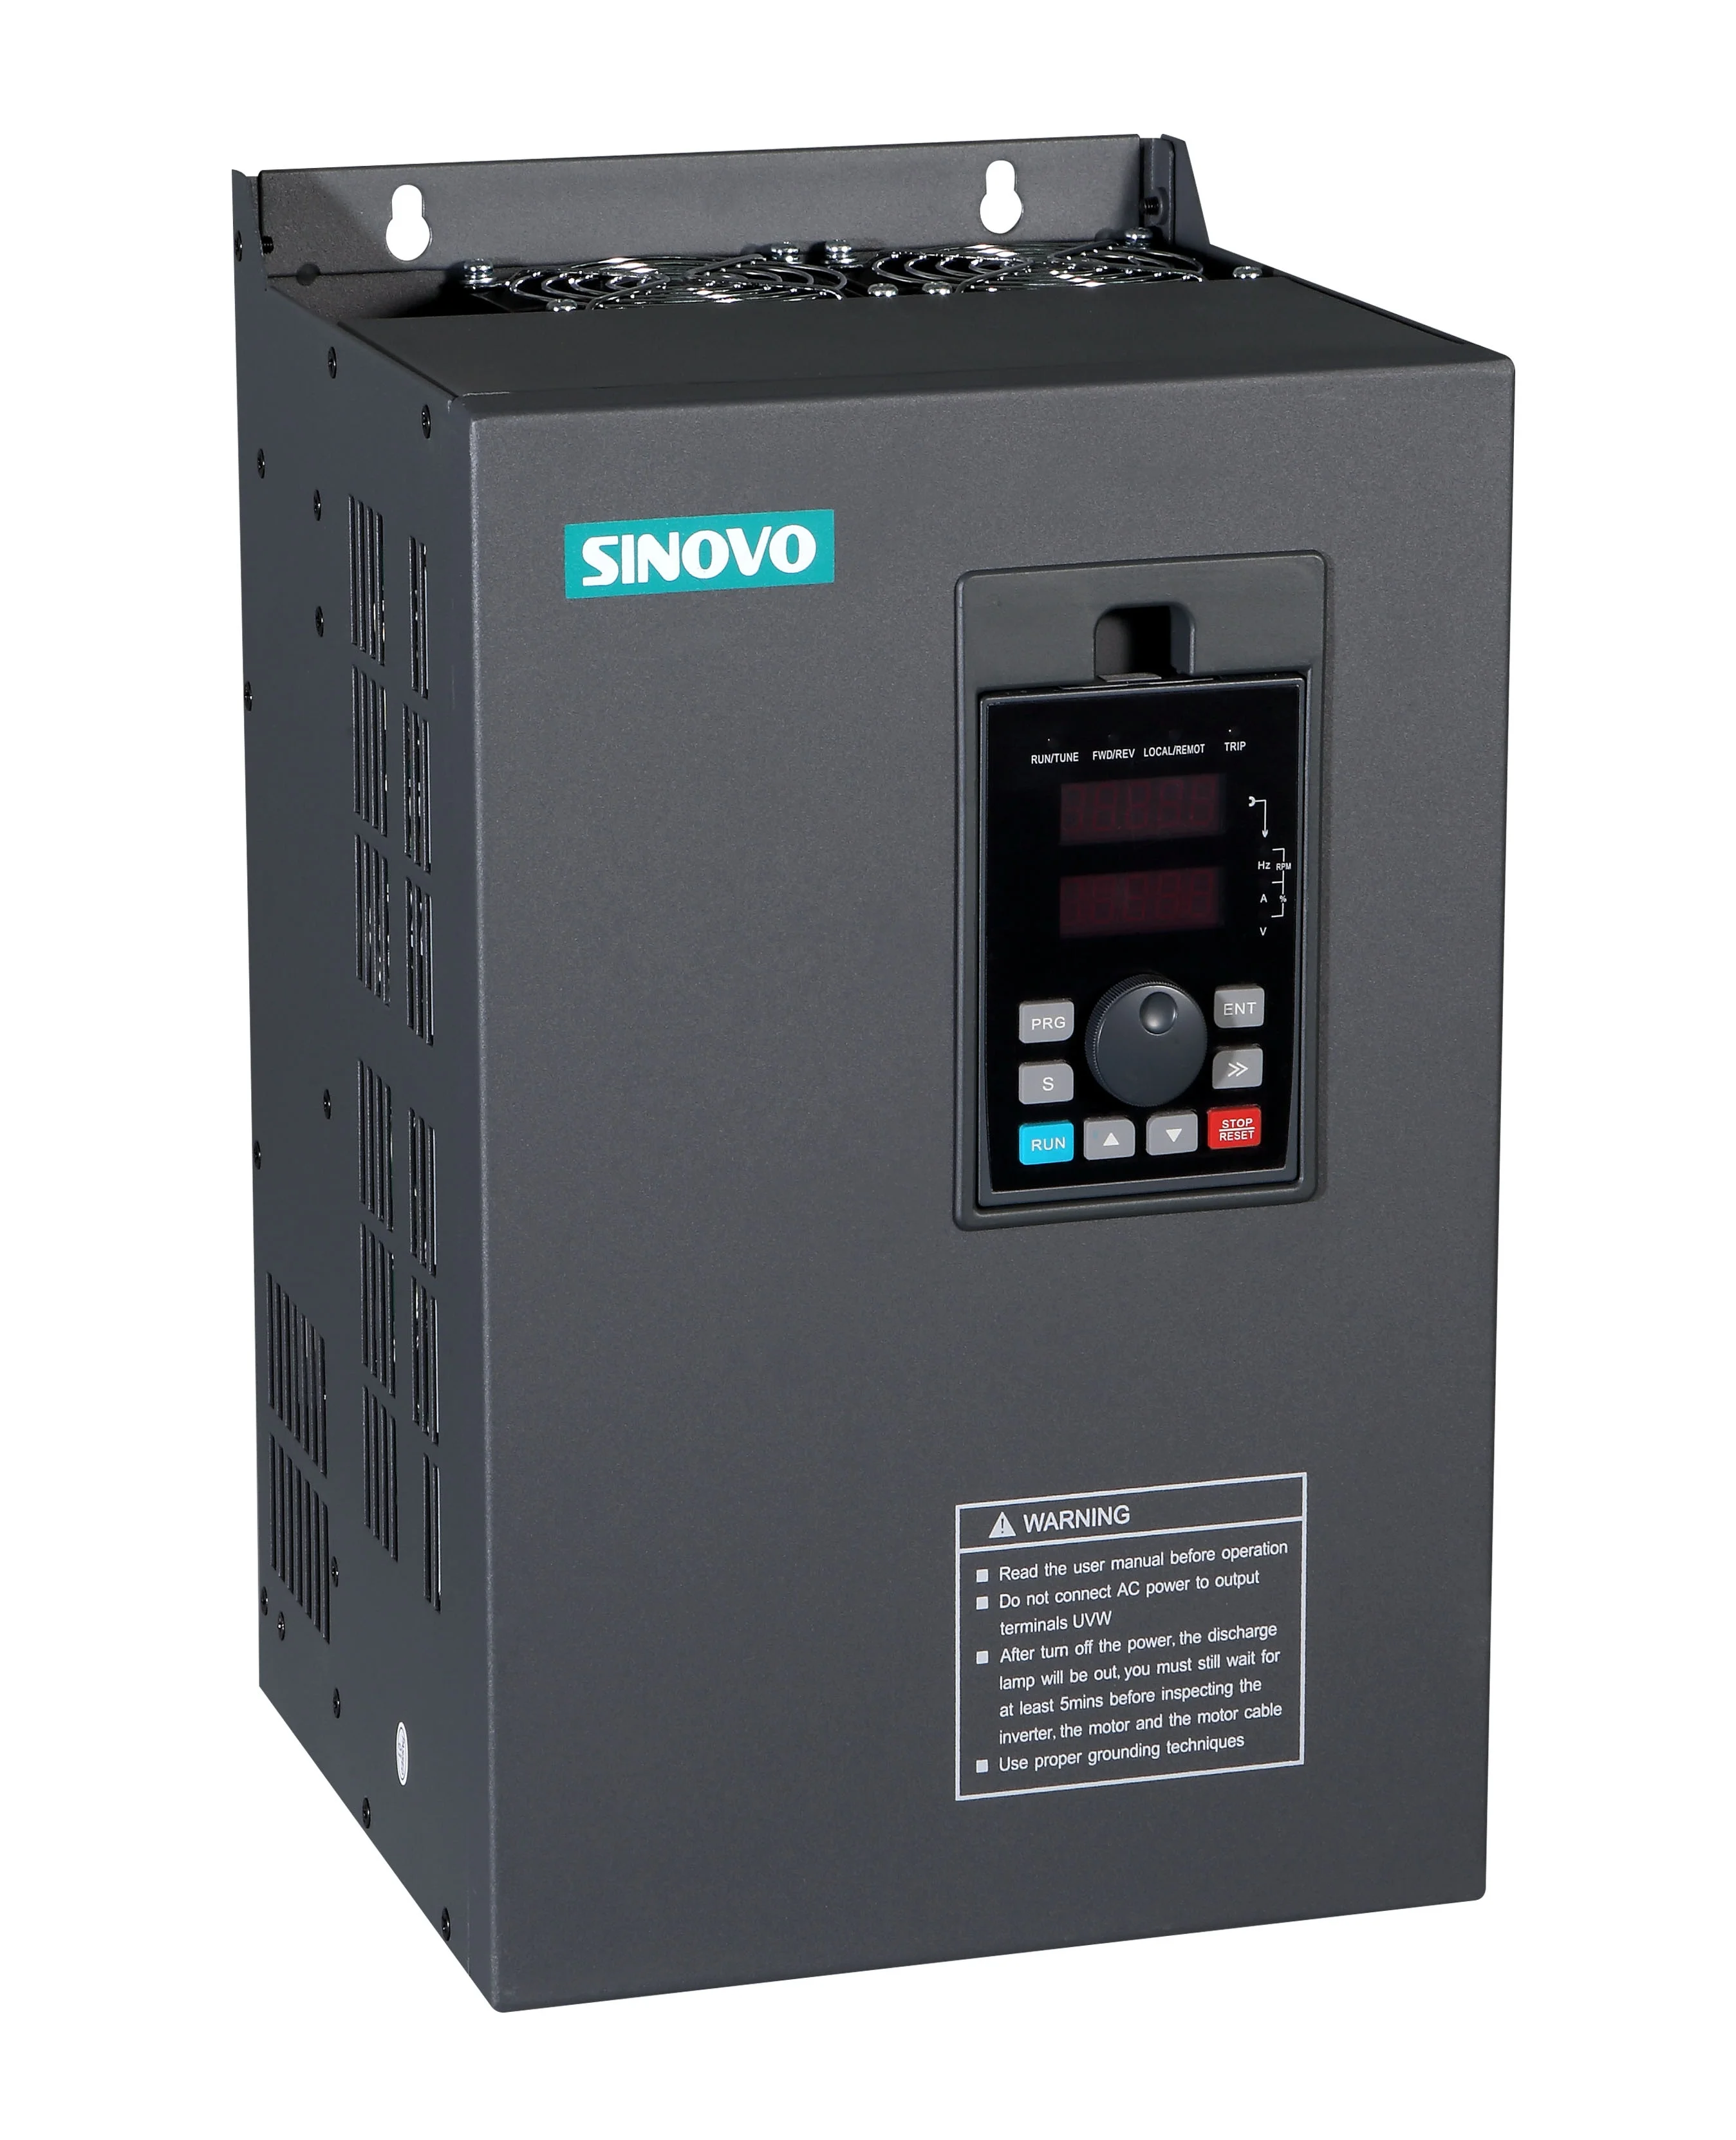 Made in China SINOVO 220V Single  Phase Input to 3 Phase Output 3 HP 2.2KW VFD for Mask Machine Application